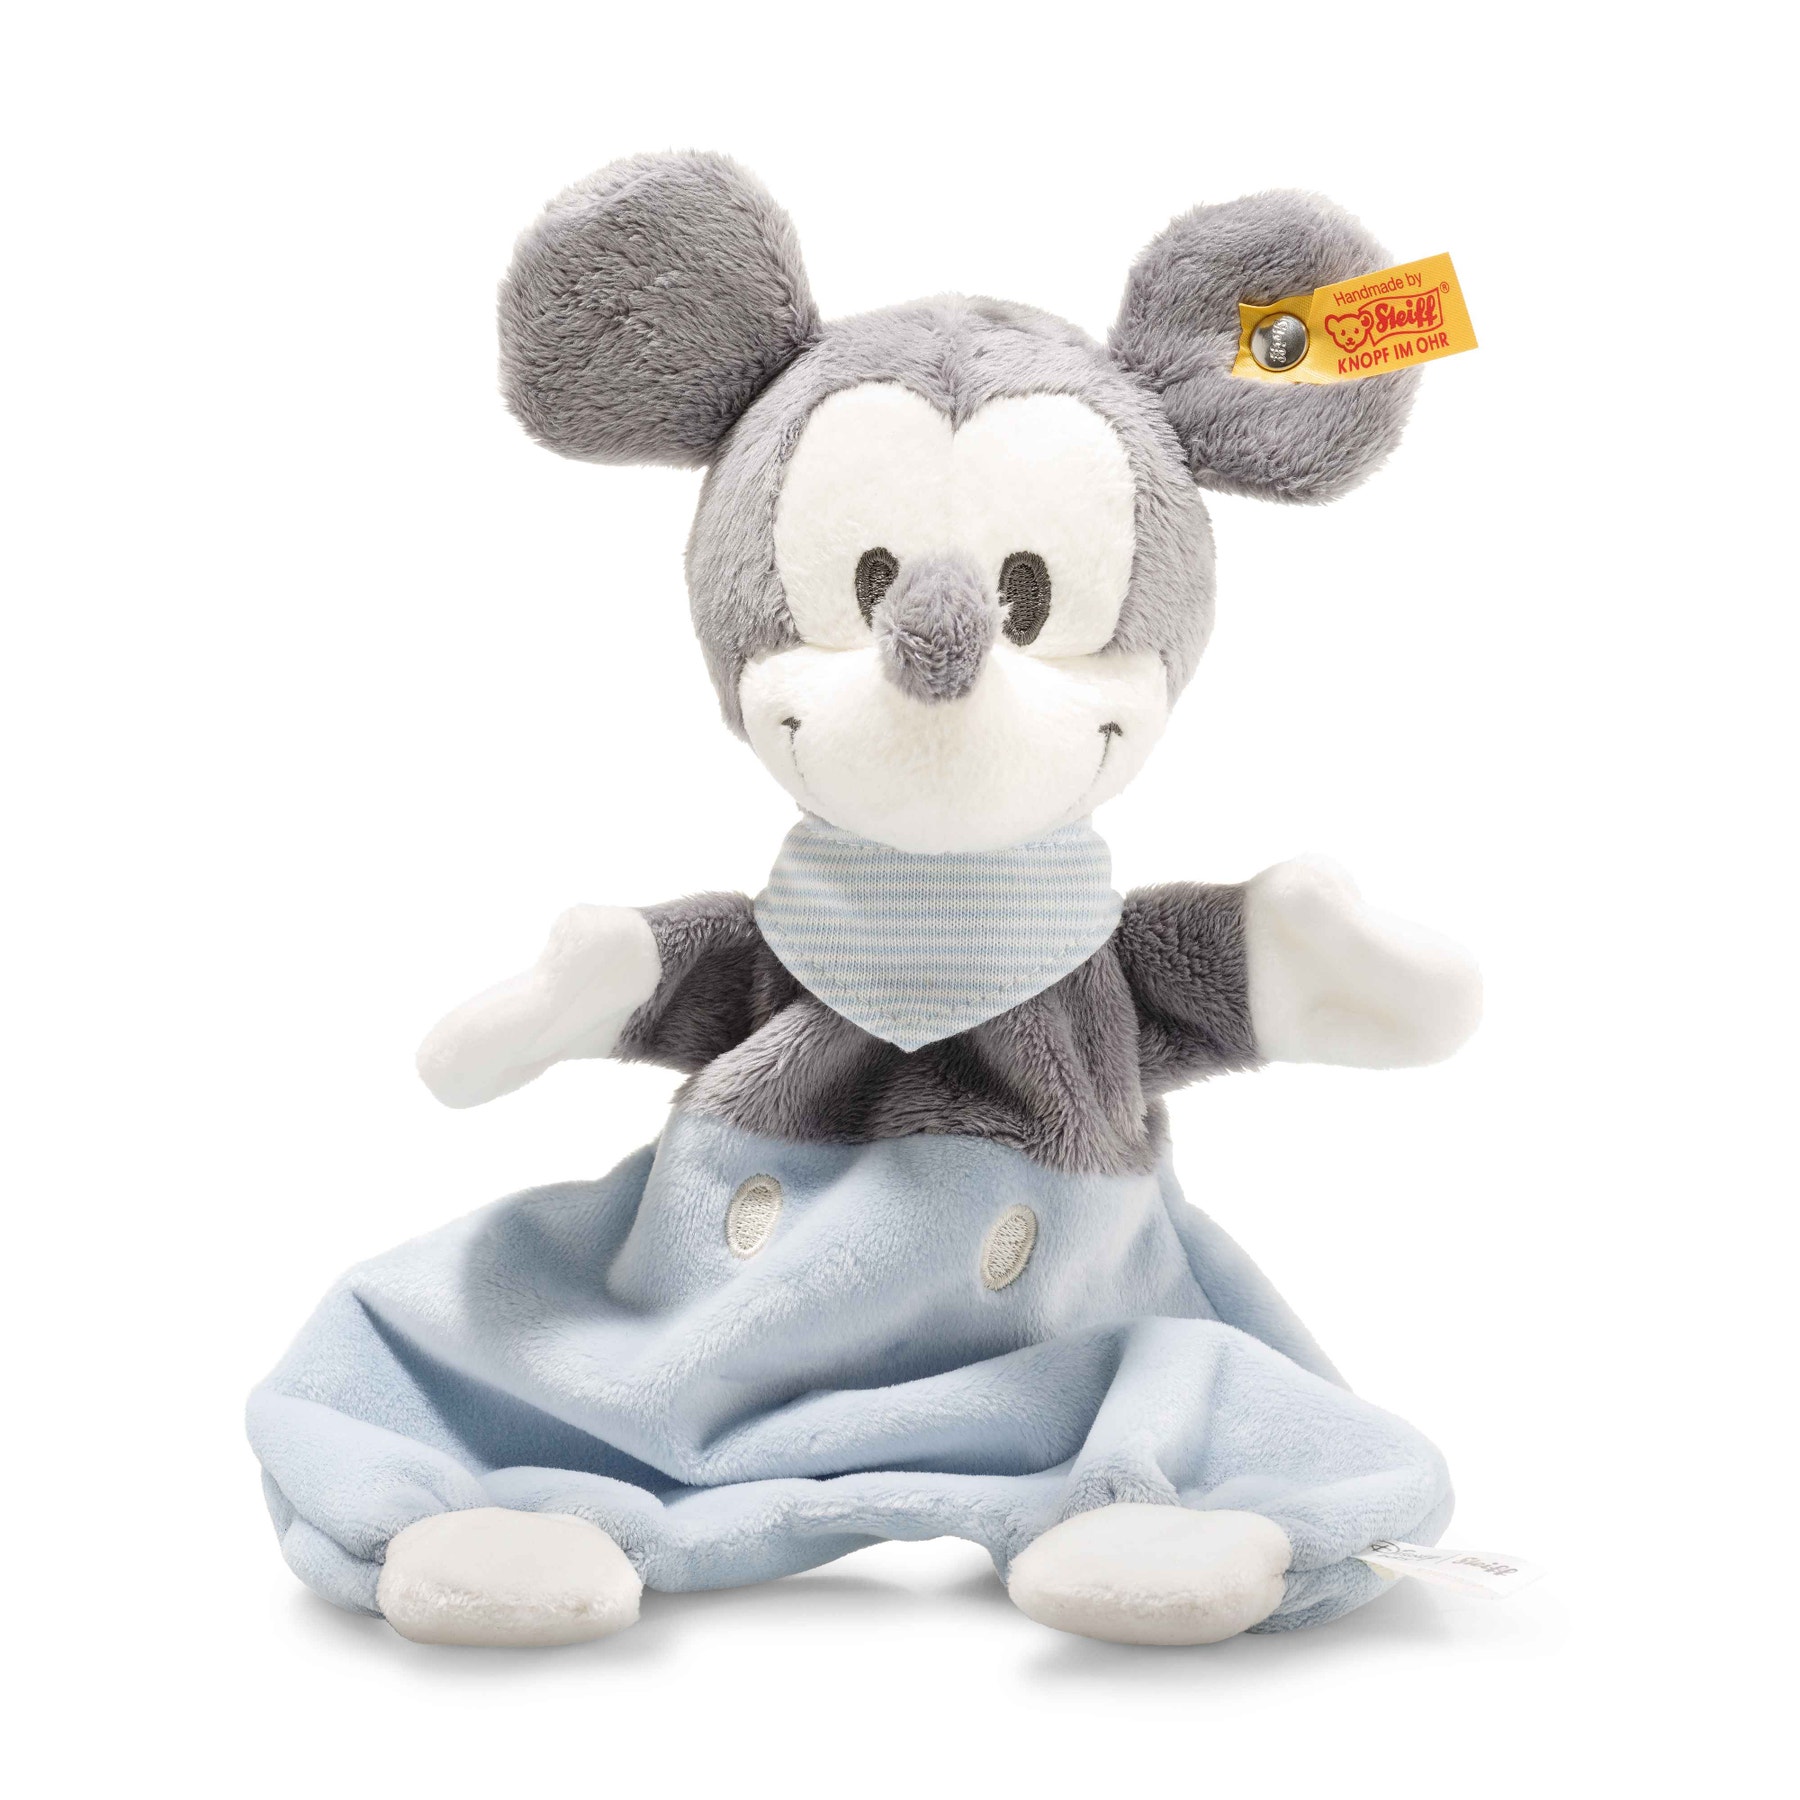 Disney Mickey Mouse Schmusetuch mit Knisterfolie